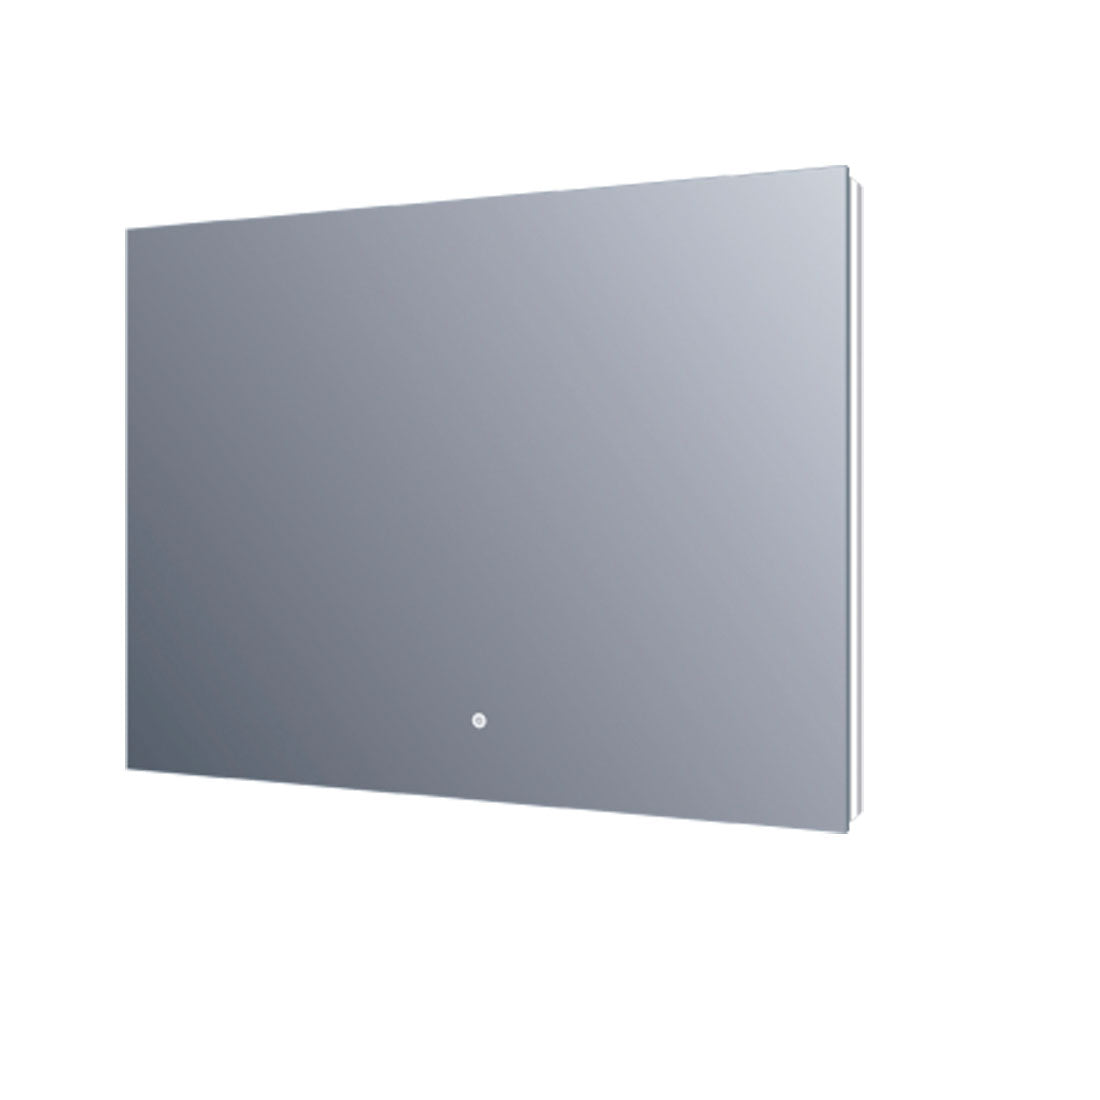 32" LED Mirror. Reflected Light. Touch Sensor Switch. 32" x 24" (DAX-DL03C-8060)